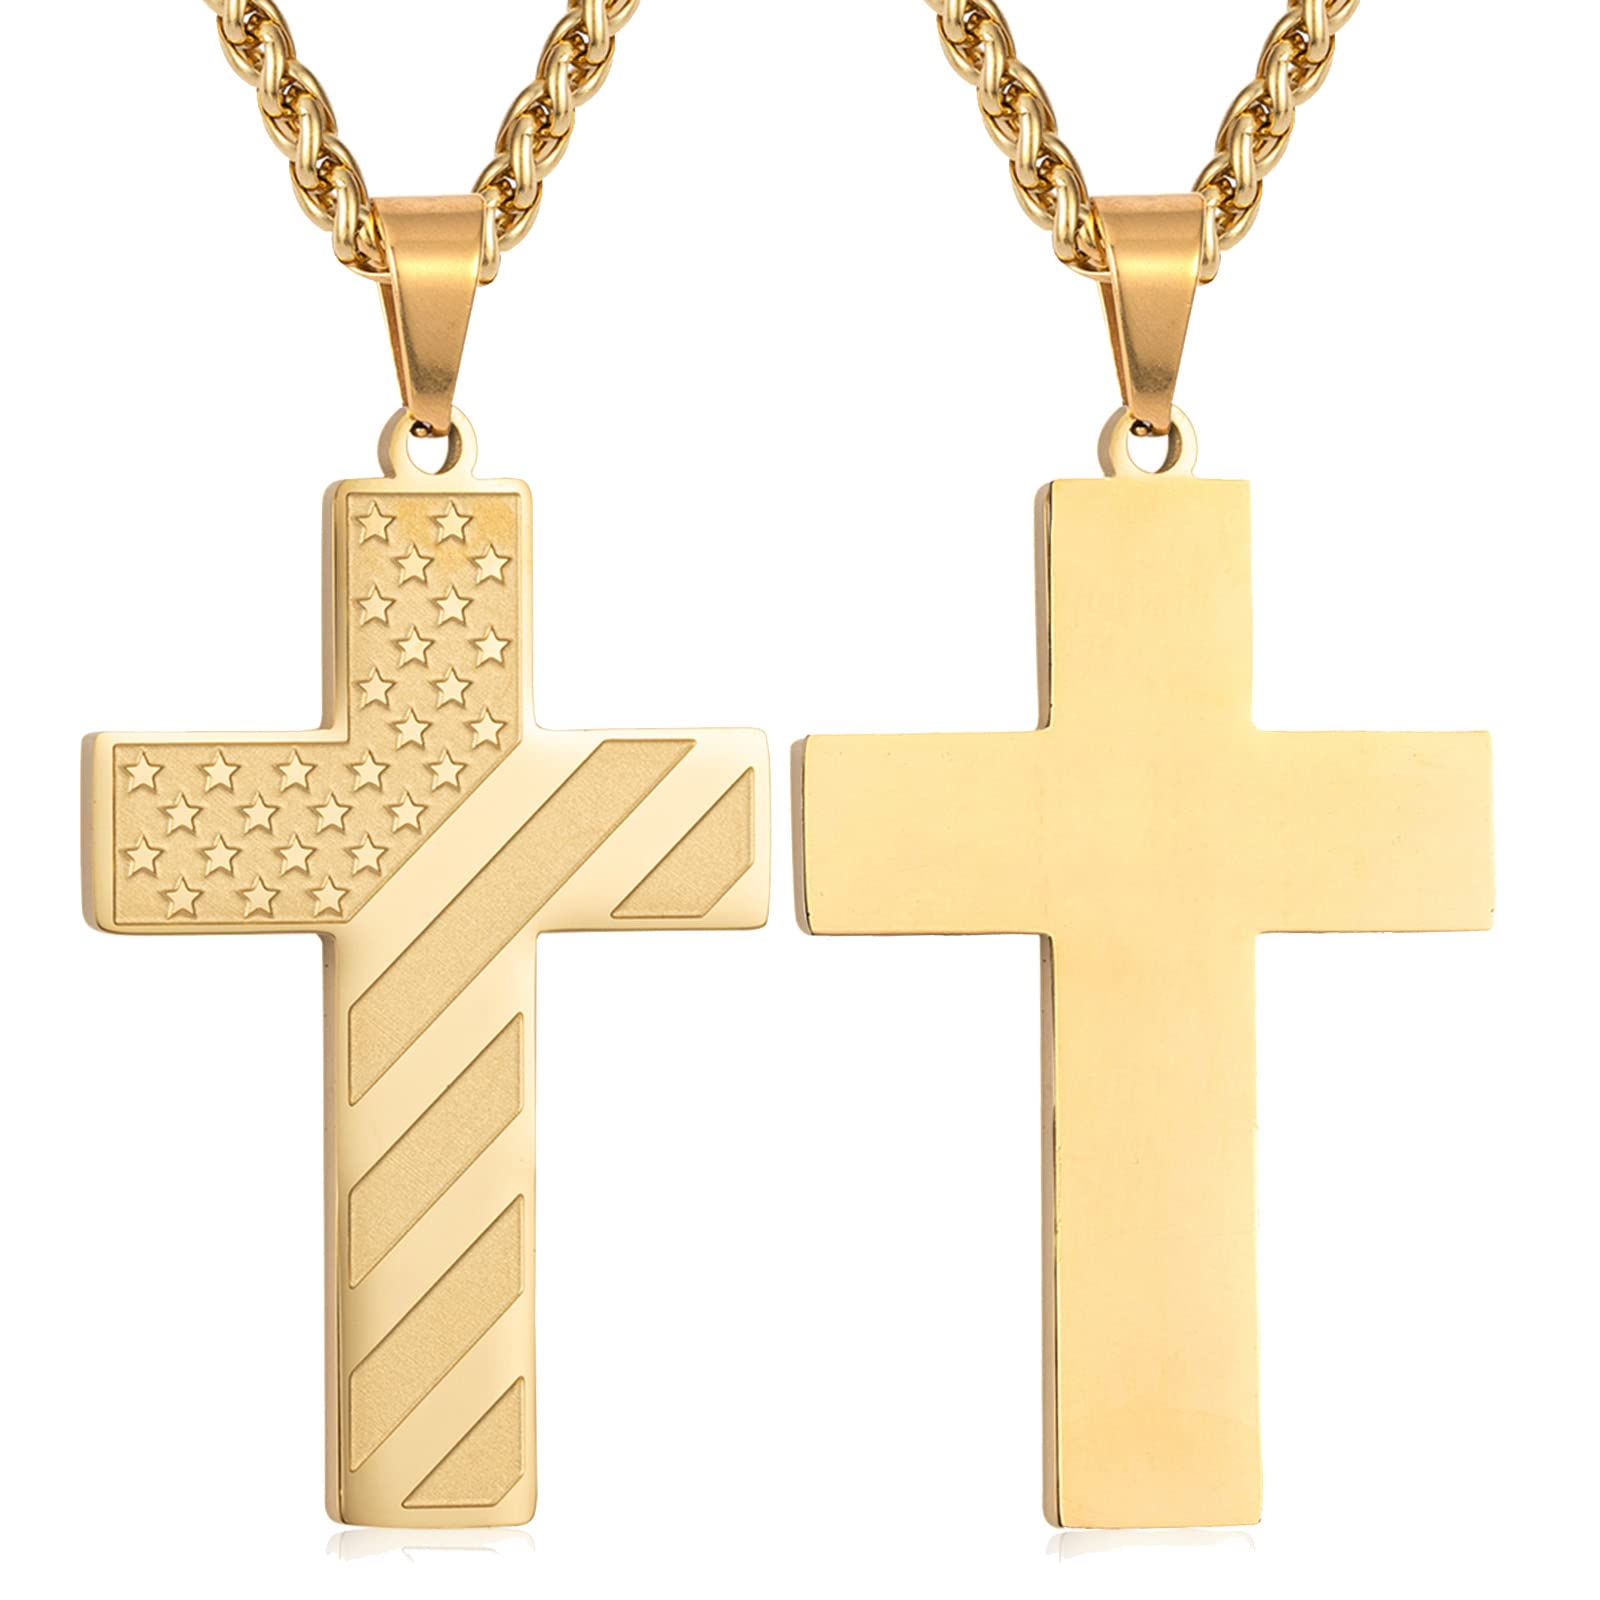 DuoDiner Gold Cross Necklace for Boys Men Pendant Chain Stainless Steel American Flag Religious Jewelry Gift